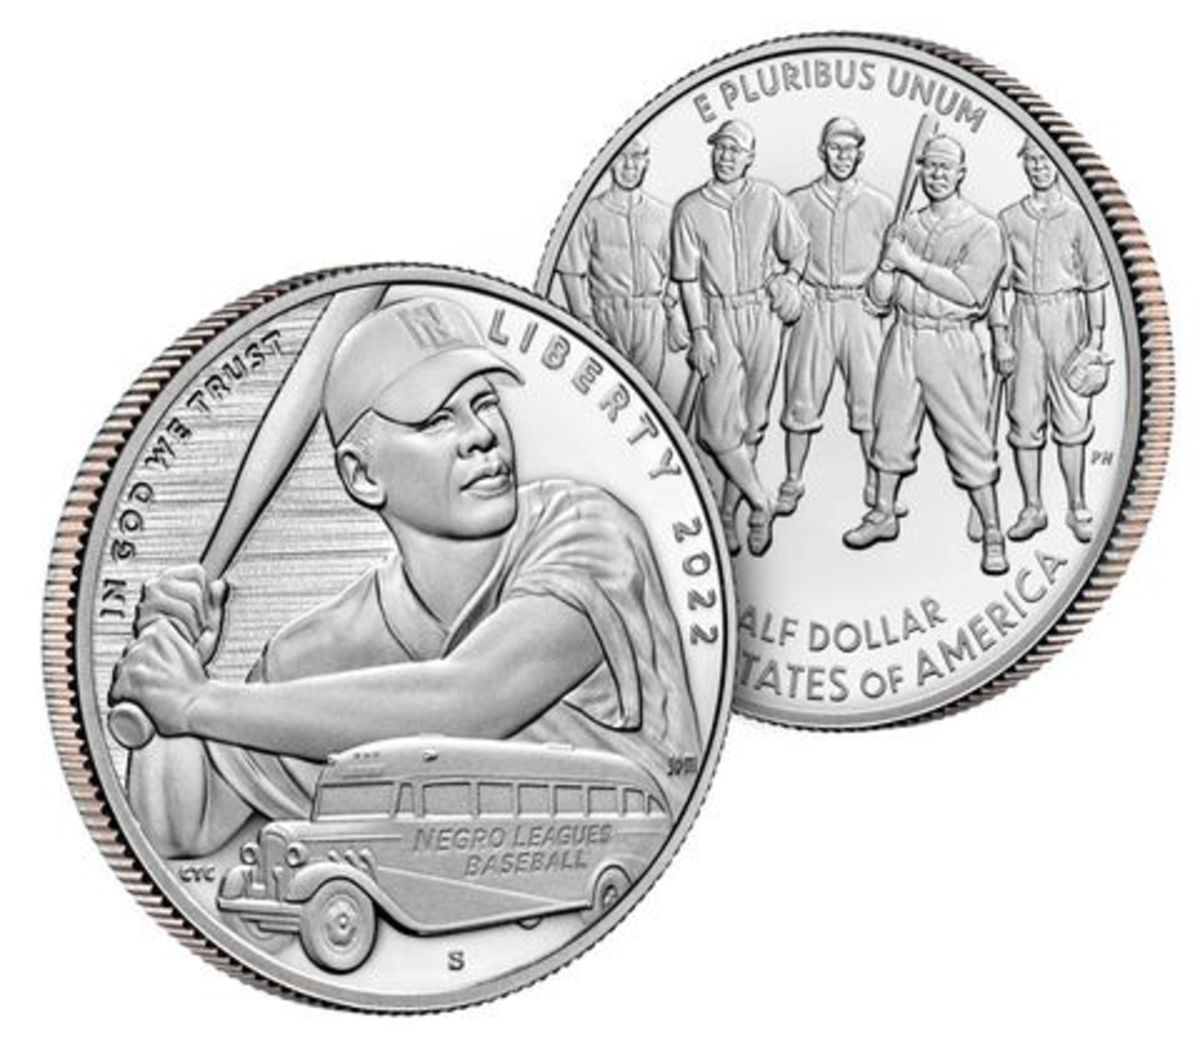 The Negro Leagues Baseball clad half dollar obverse design depicts a Negro Leagues tour bus that served as their home on the road when players were refused entry to hotels and restaurants. The batter exemplifies the determination to play the game he loves. The reverse shows a group of five Negro Leagues Baseball players.